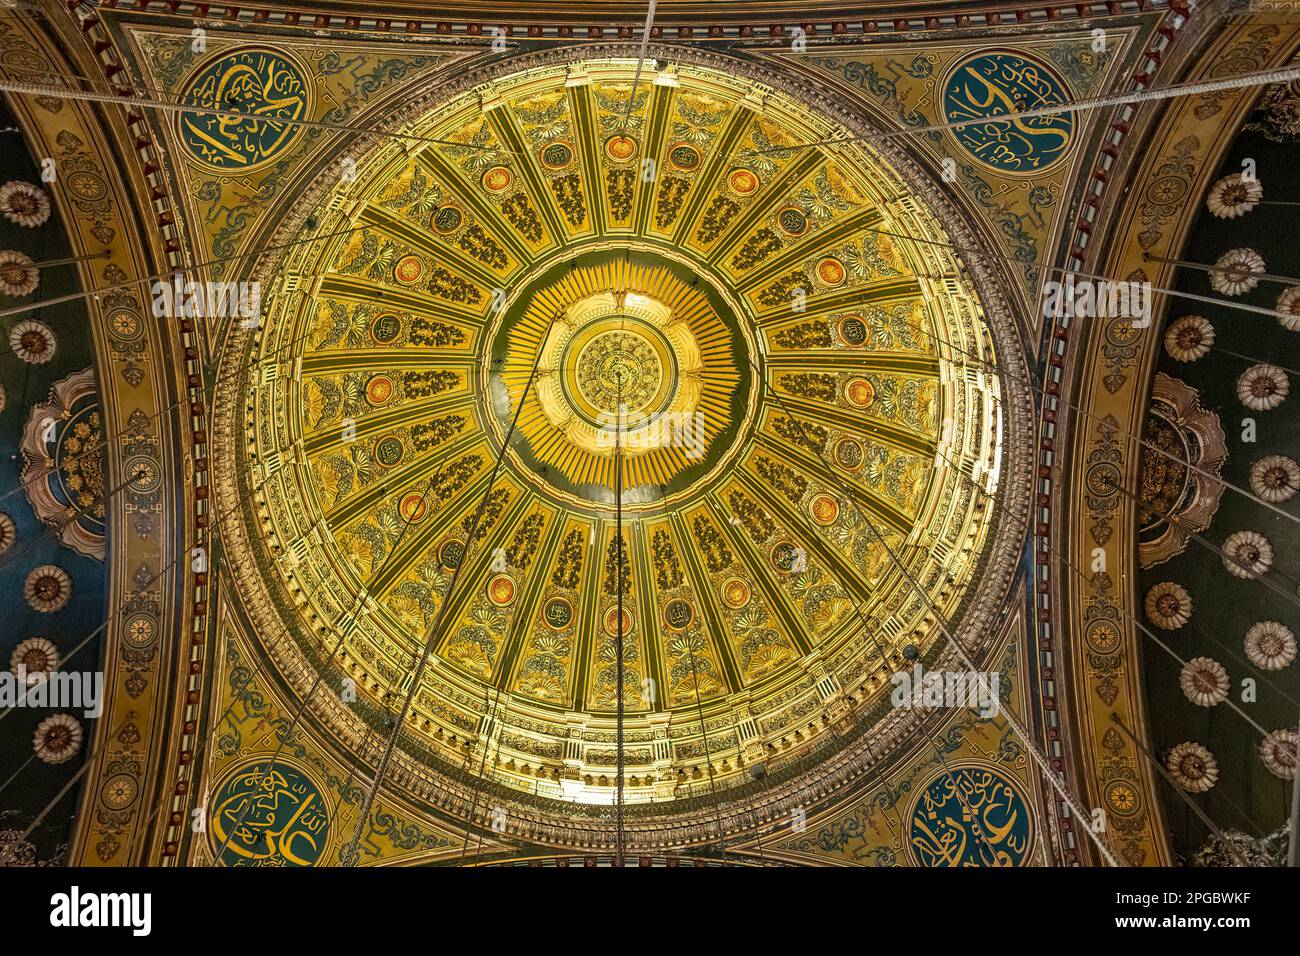 Inside Dome of the Mosque of Mohamed Ali, Cairo, Egypt Stock Photo